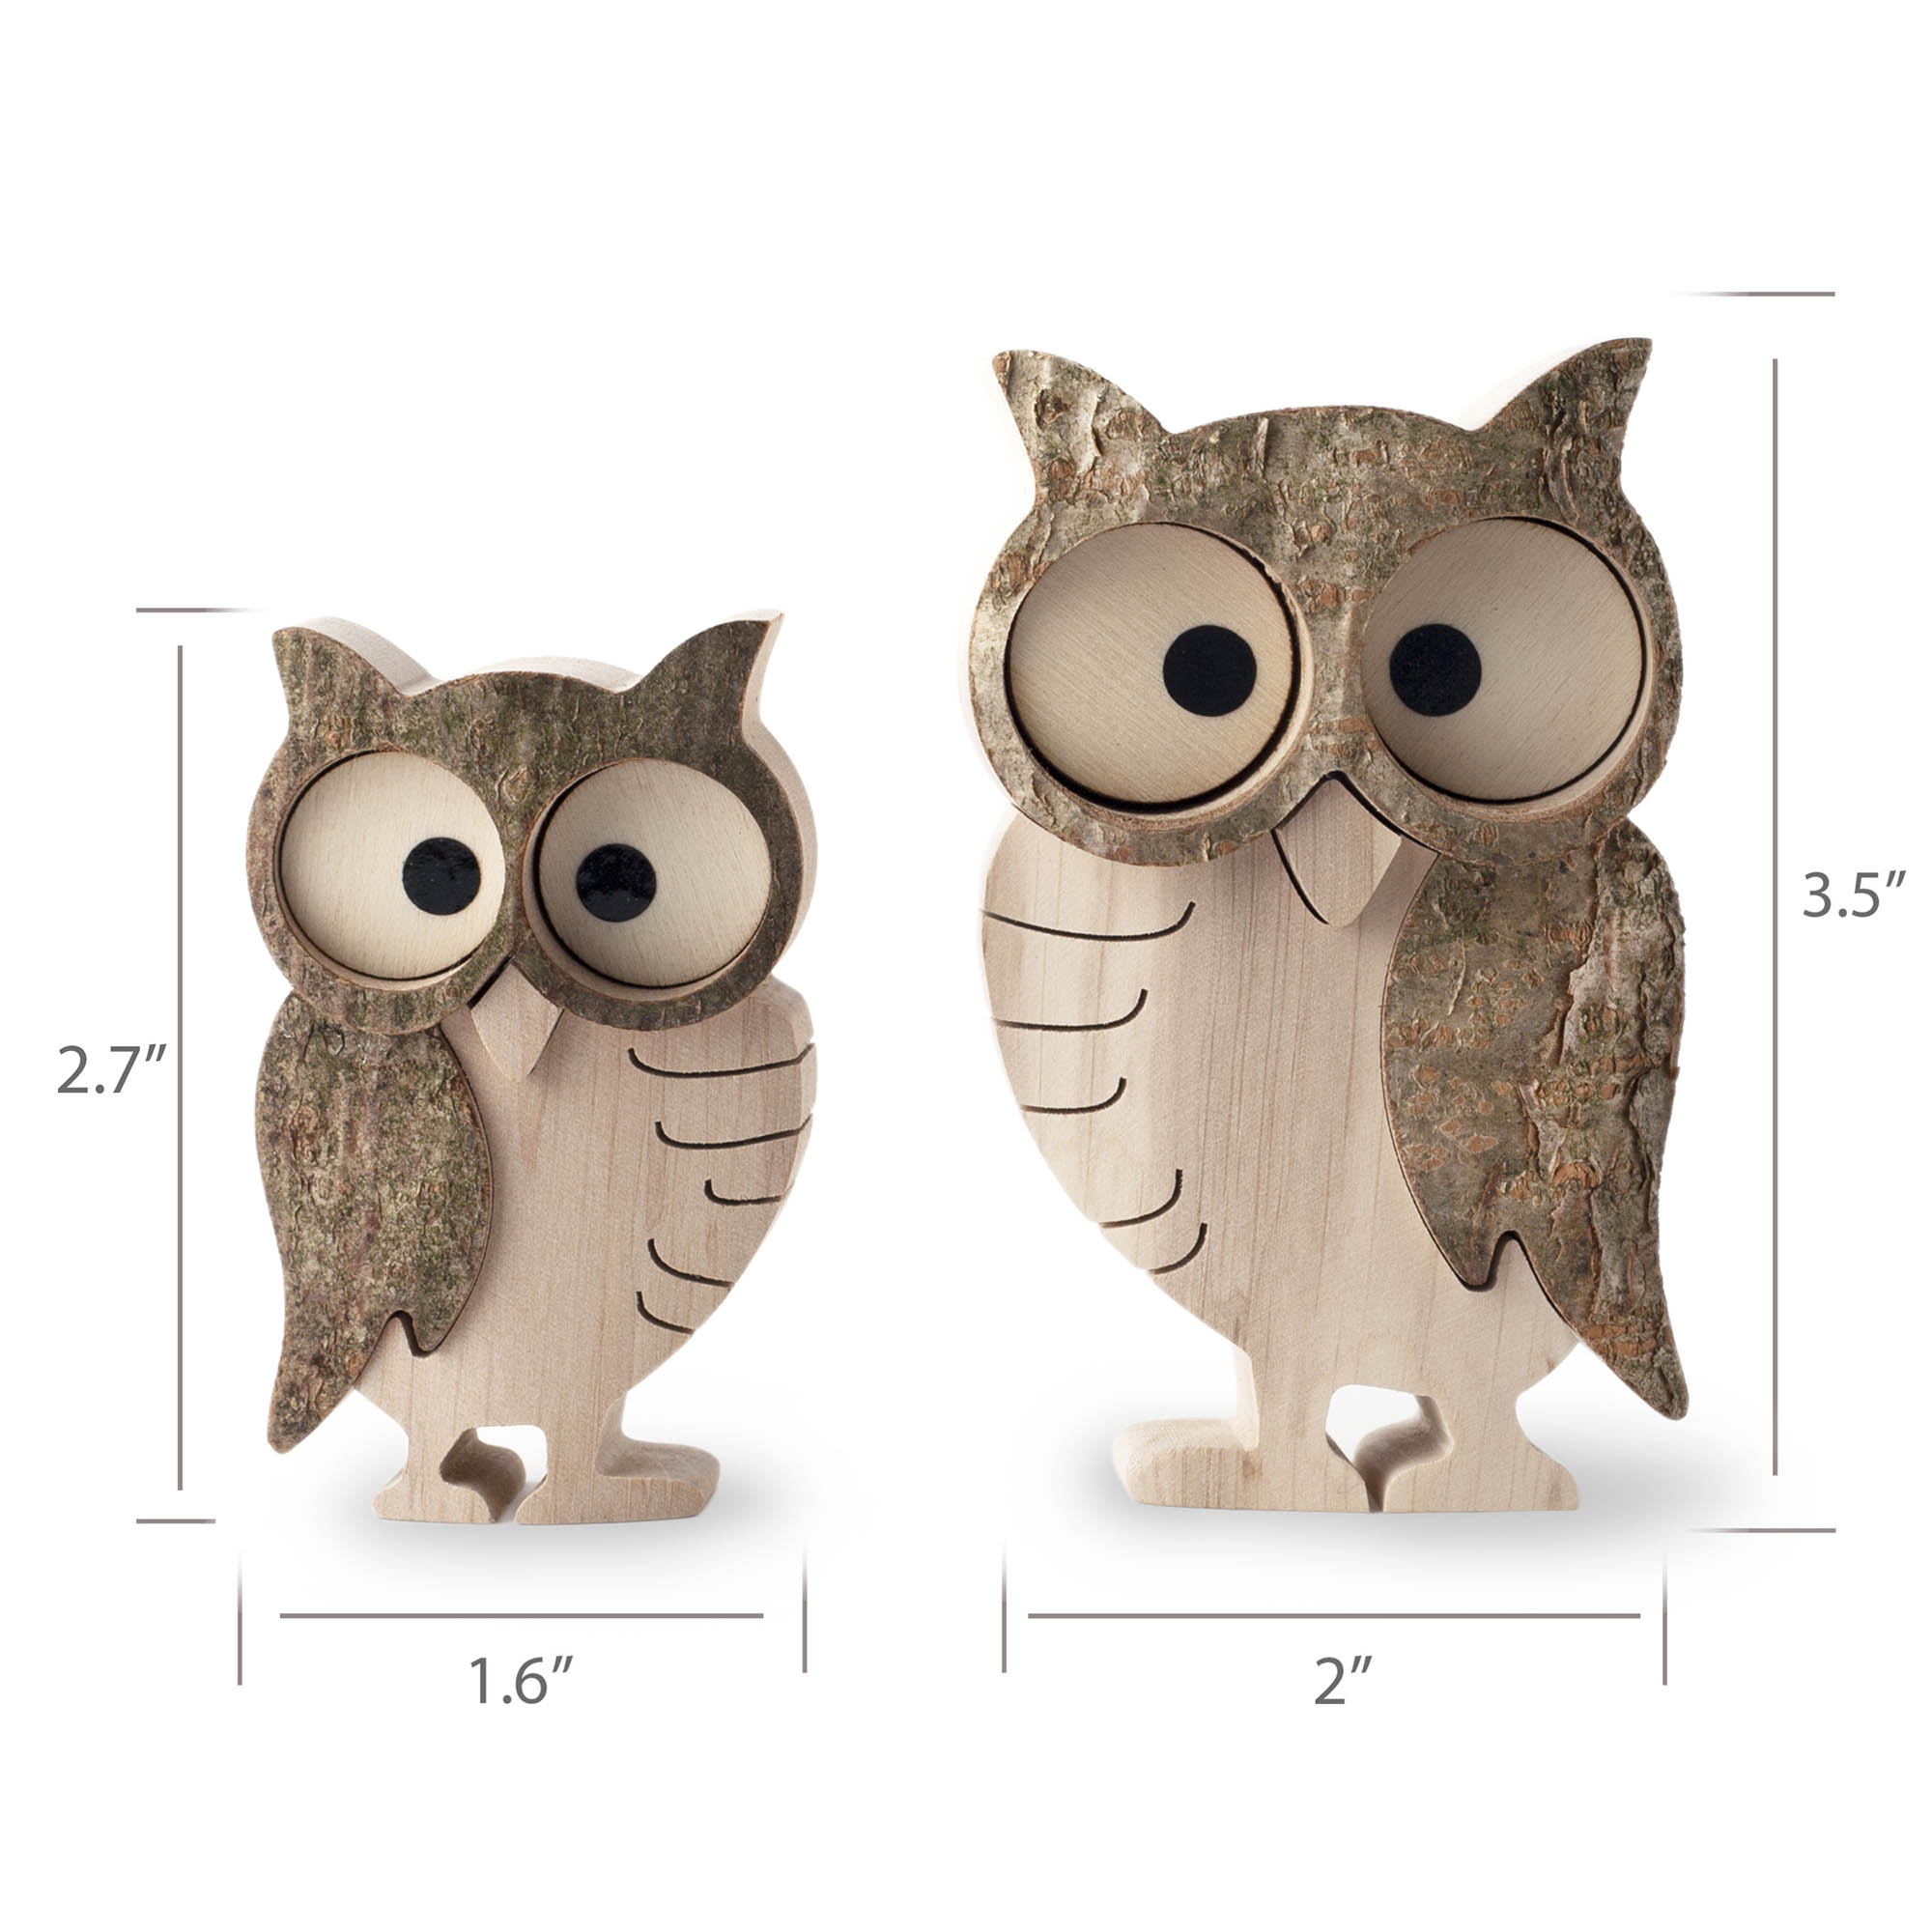 Miner advice human resources Wooden Owl Figurine & Owl Decorations for Wall and Shelf - Forest Decor